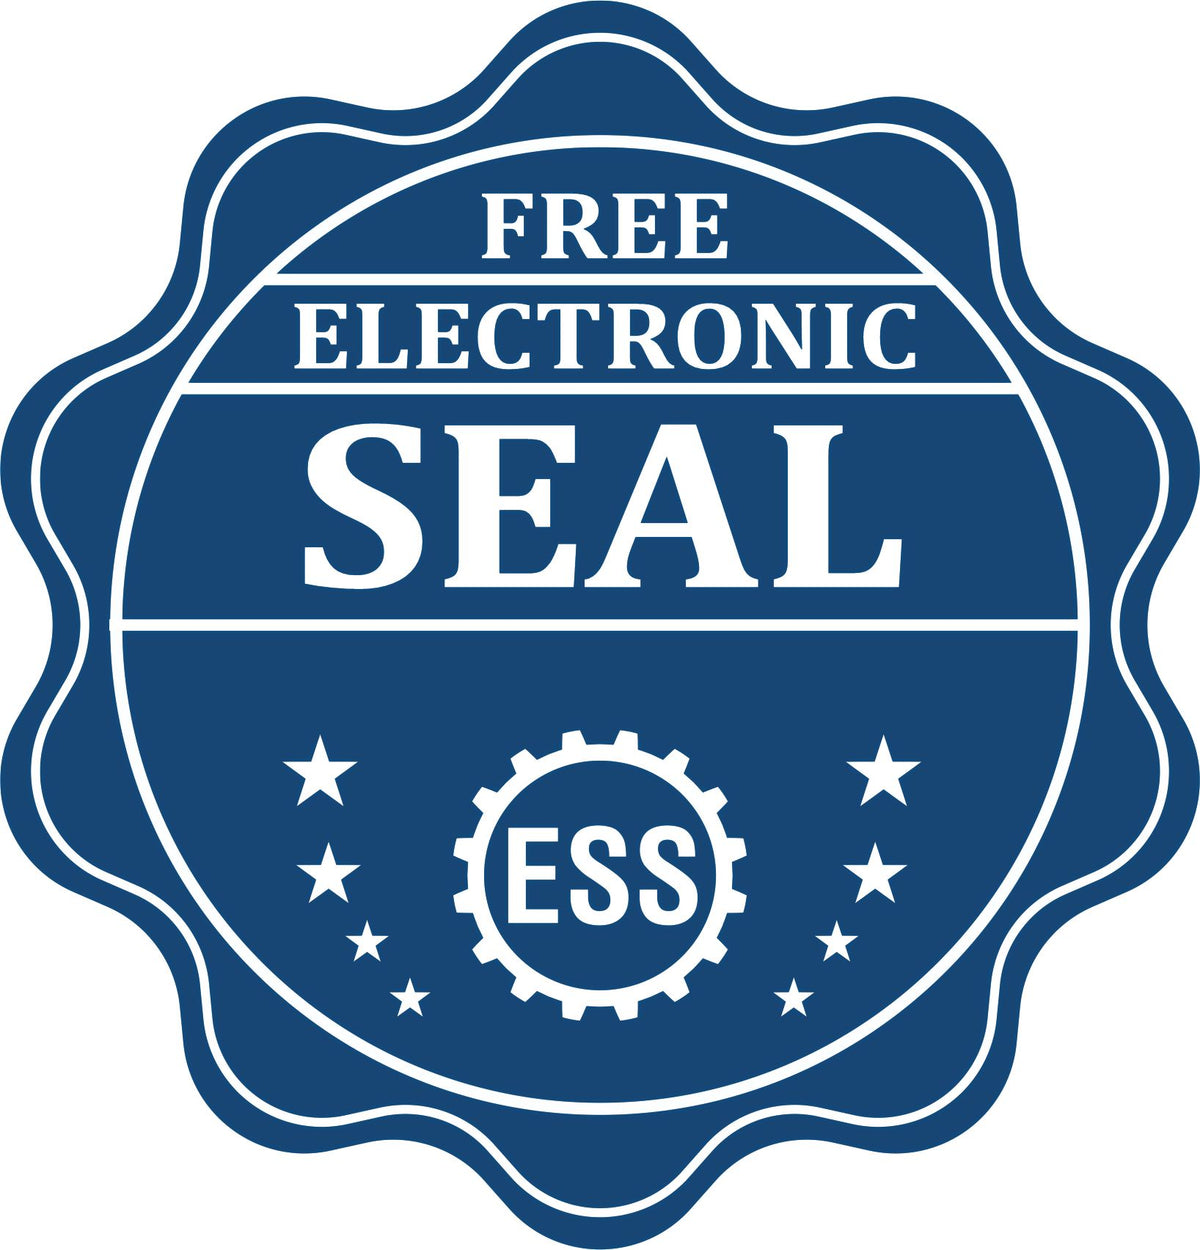 A badge showing a free electronic seal for the Hybrid West Virginia Engineer Seal with stars and the ESS gear on the emblem.